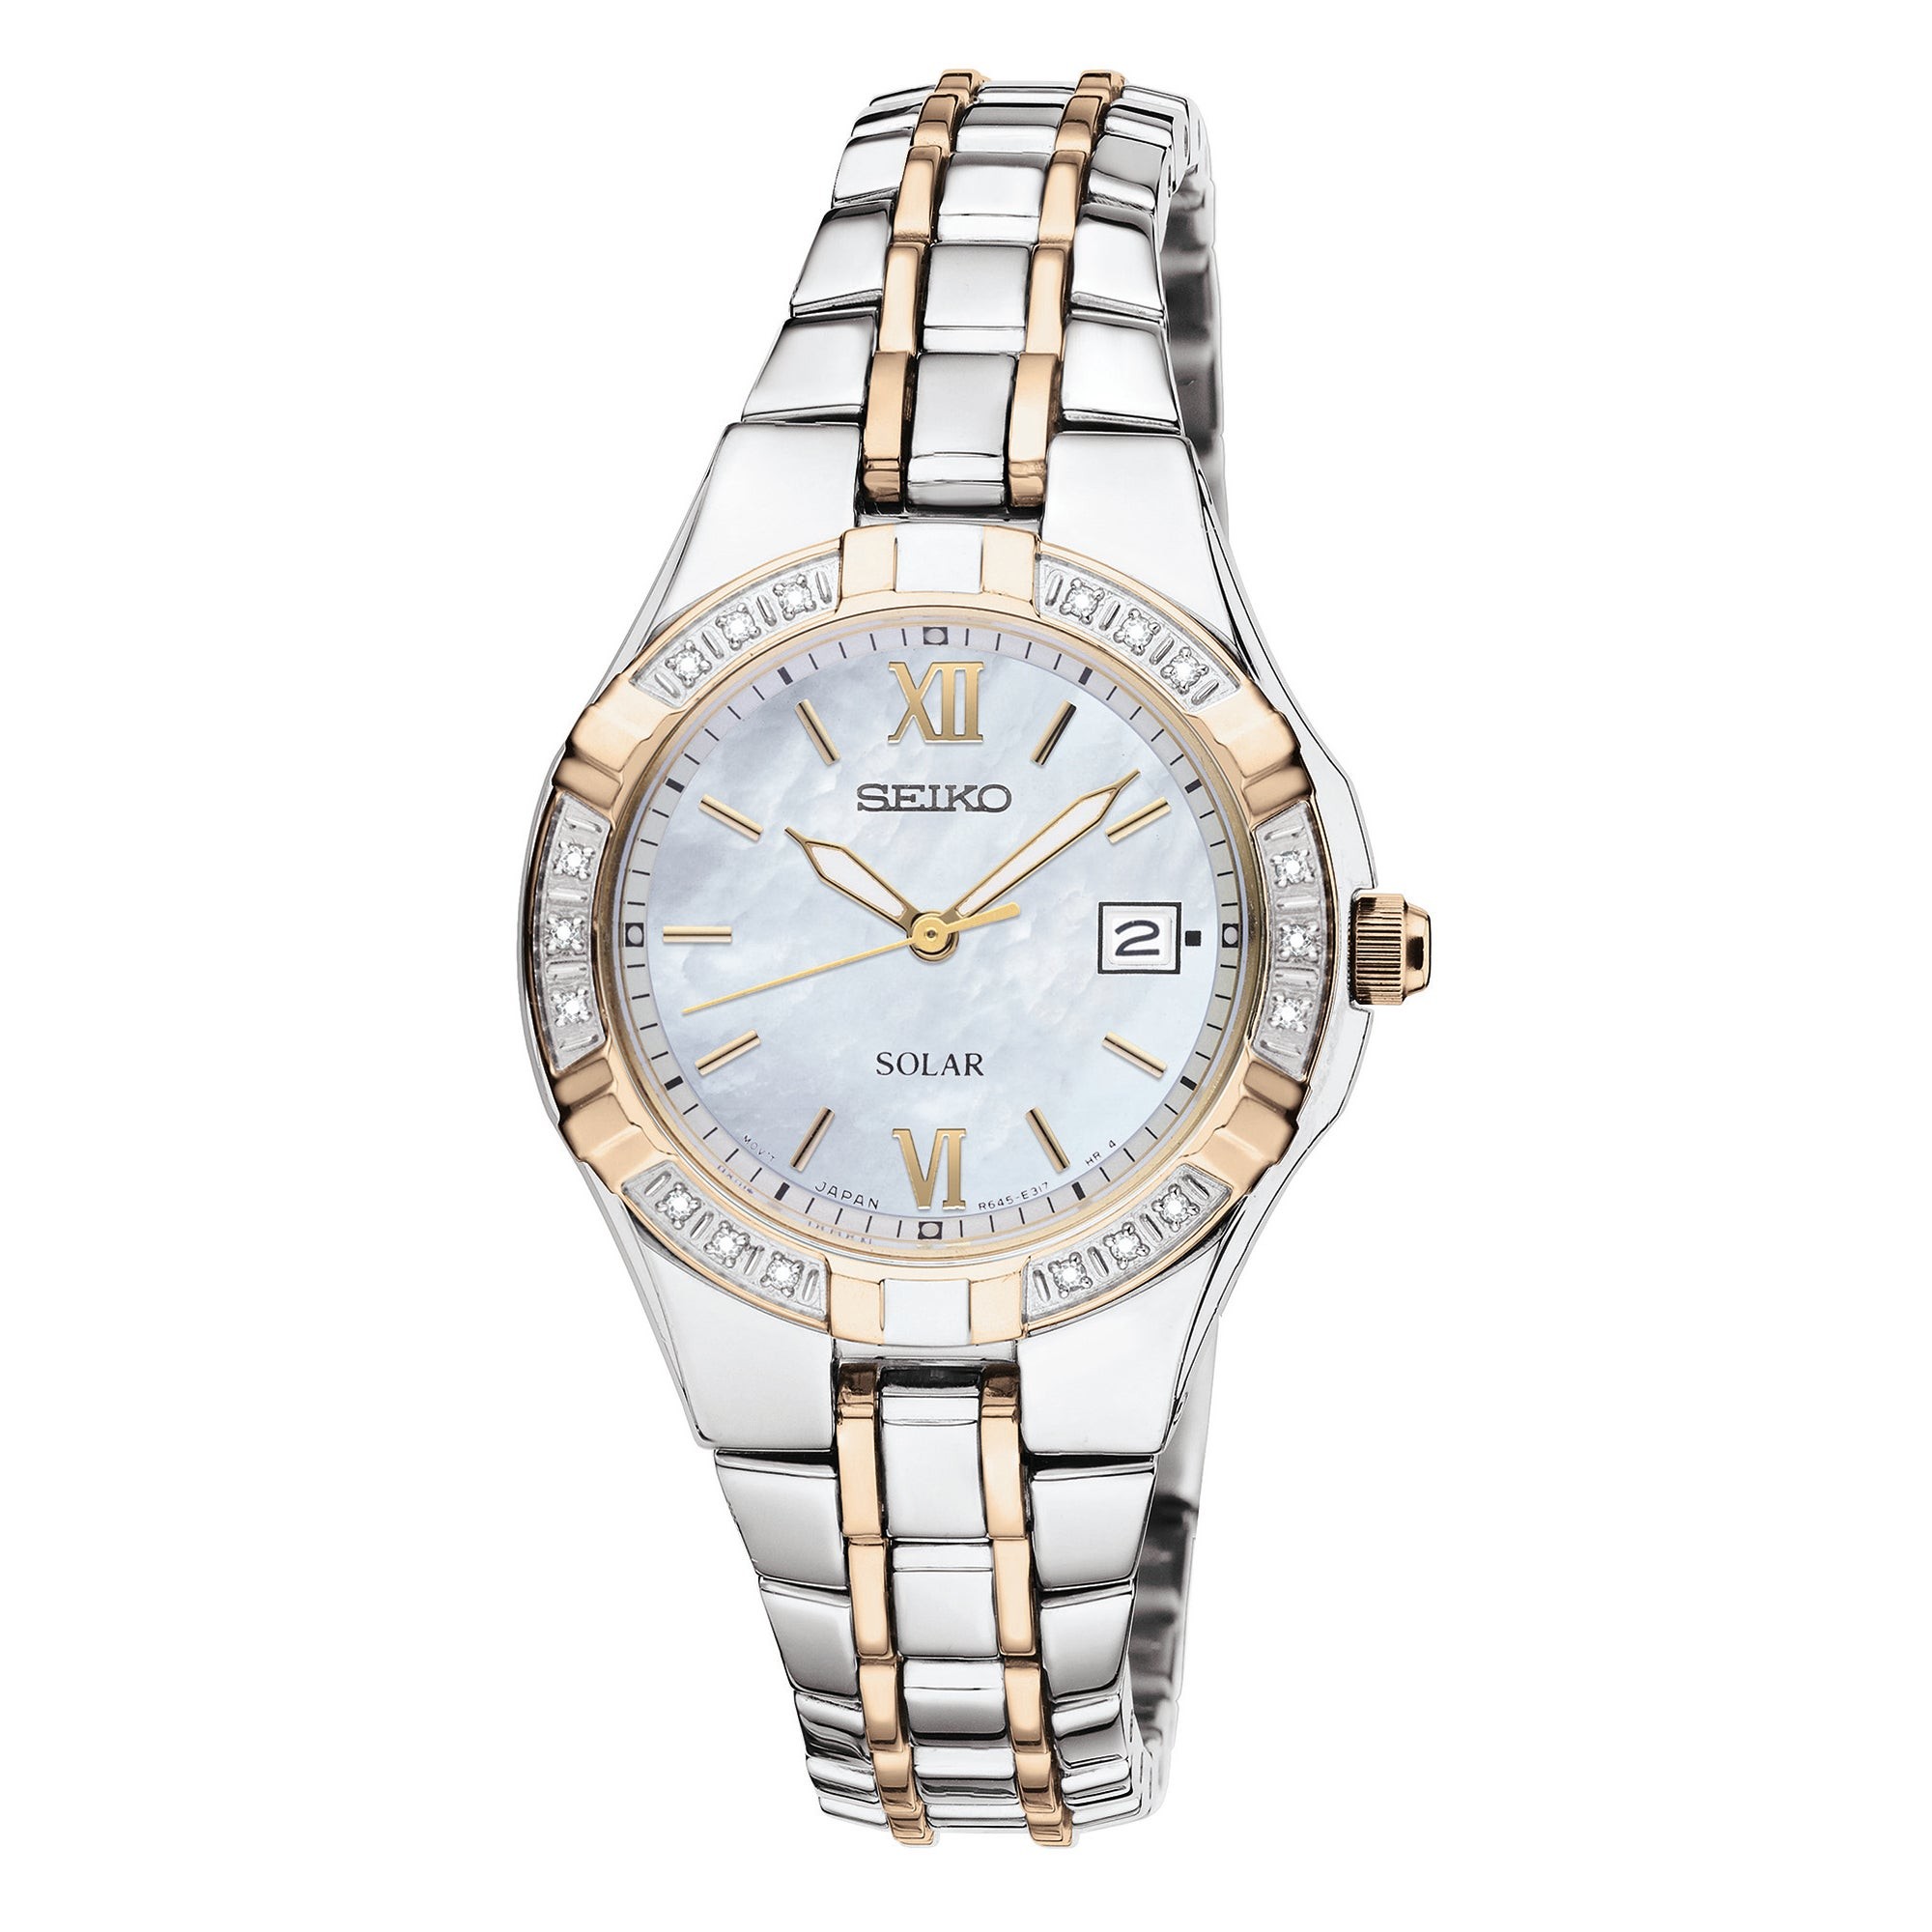 Ladies' Diamond 2-Tone Stainless Steel Watch, Mother-of-Pearl Dial